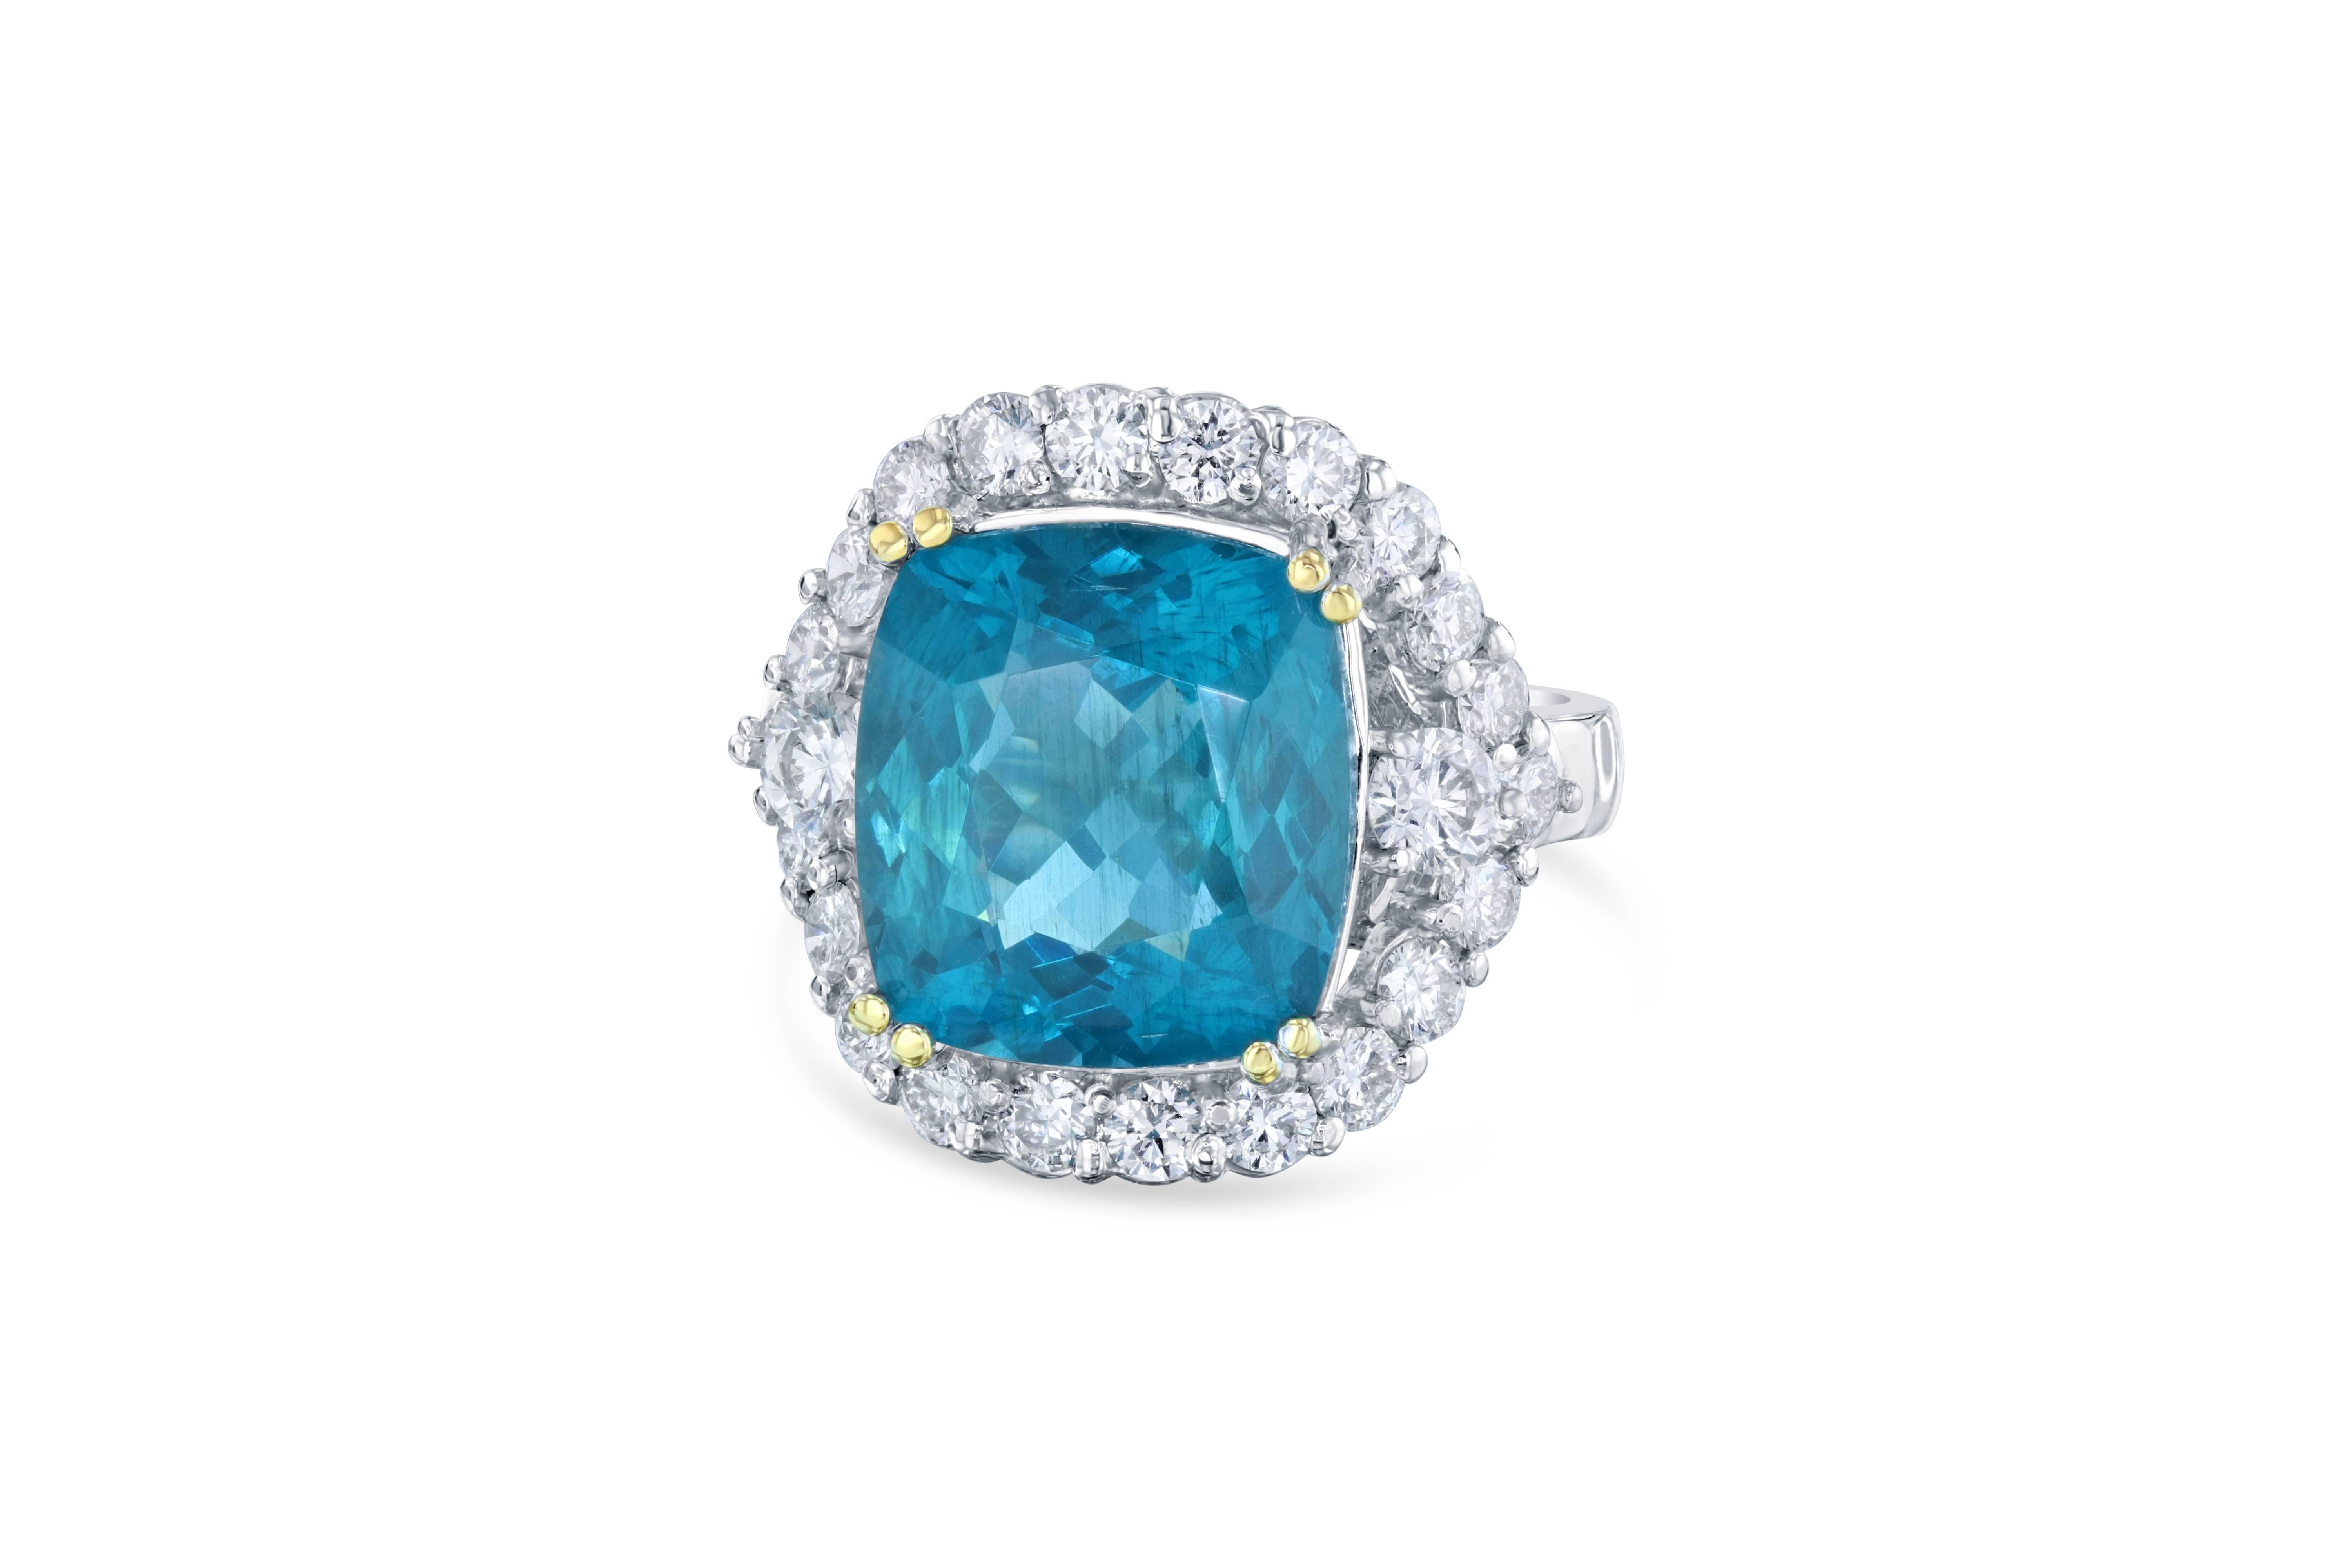 10.08 Carat Cushion Cut Apatite Diamond White Gold Cocktail Ring!

This ring has a large and gorgeous 8.52 carat Apatite in the center of the ring and is surrounded by 24 Round Cut Diamonds that weigh 1.56 carats Clarity: VS2, Color: H.  The total